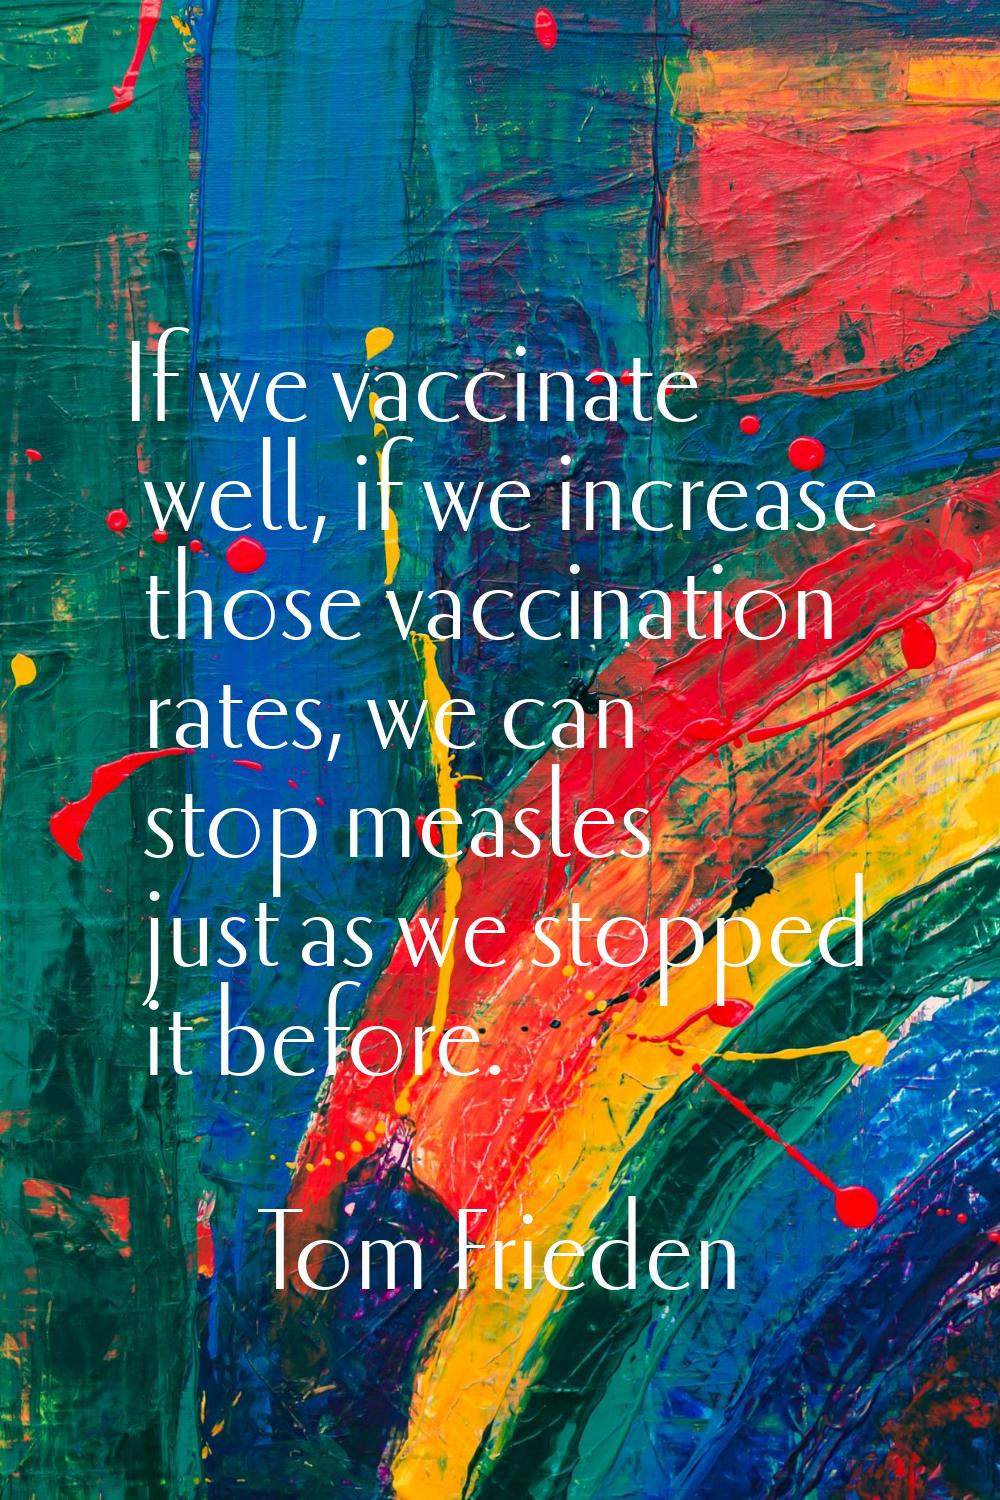 If we vaccinate well, if we increase those vaccination rates, we can stop measles just as we stoppe